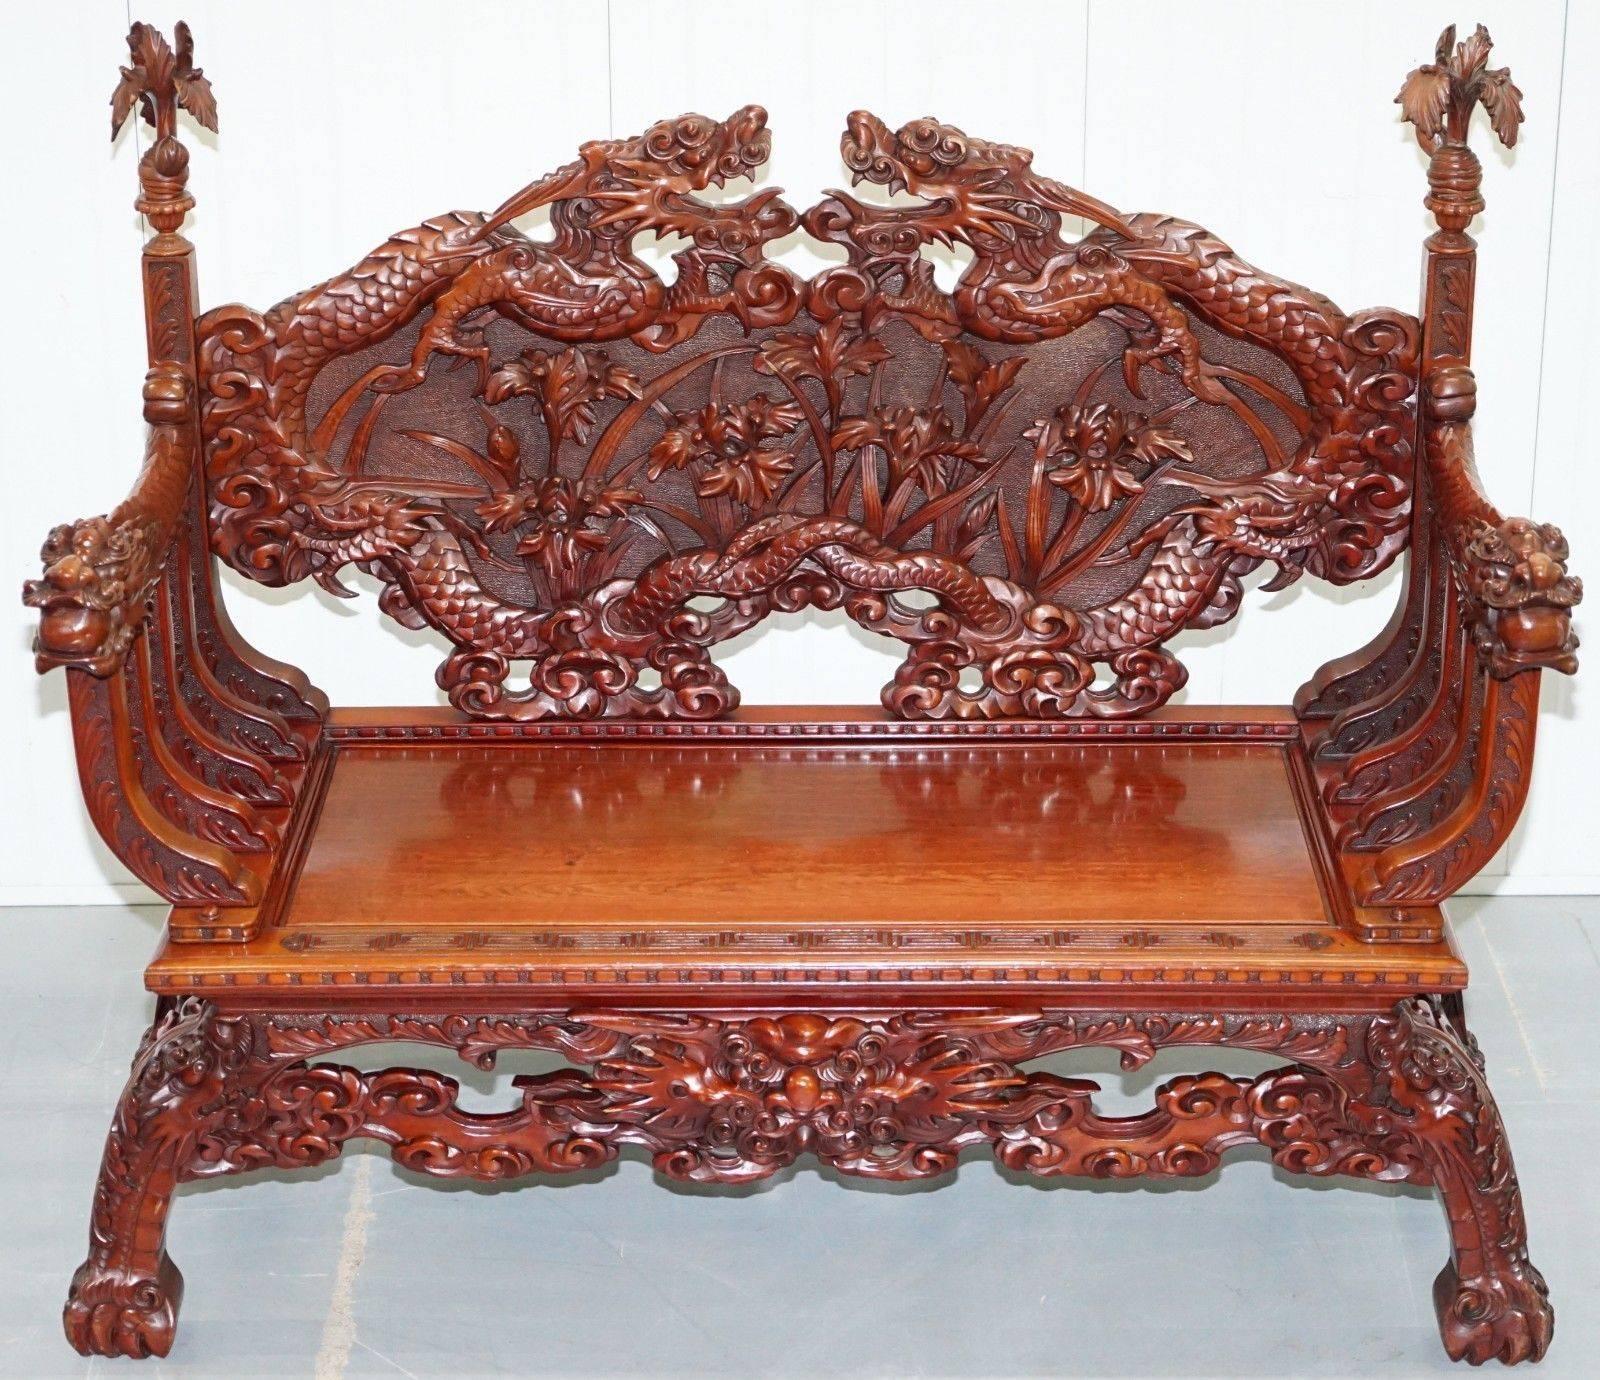 Wimbledon-Furniture

Wimbledon-Furniture is delighted to offer for sale this stunning hand carved and made in China circa 1890 export redwood Teak bench depicting dragons

Please note the delivery fee listed is just a guide, it covers within the M25